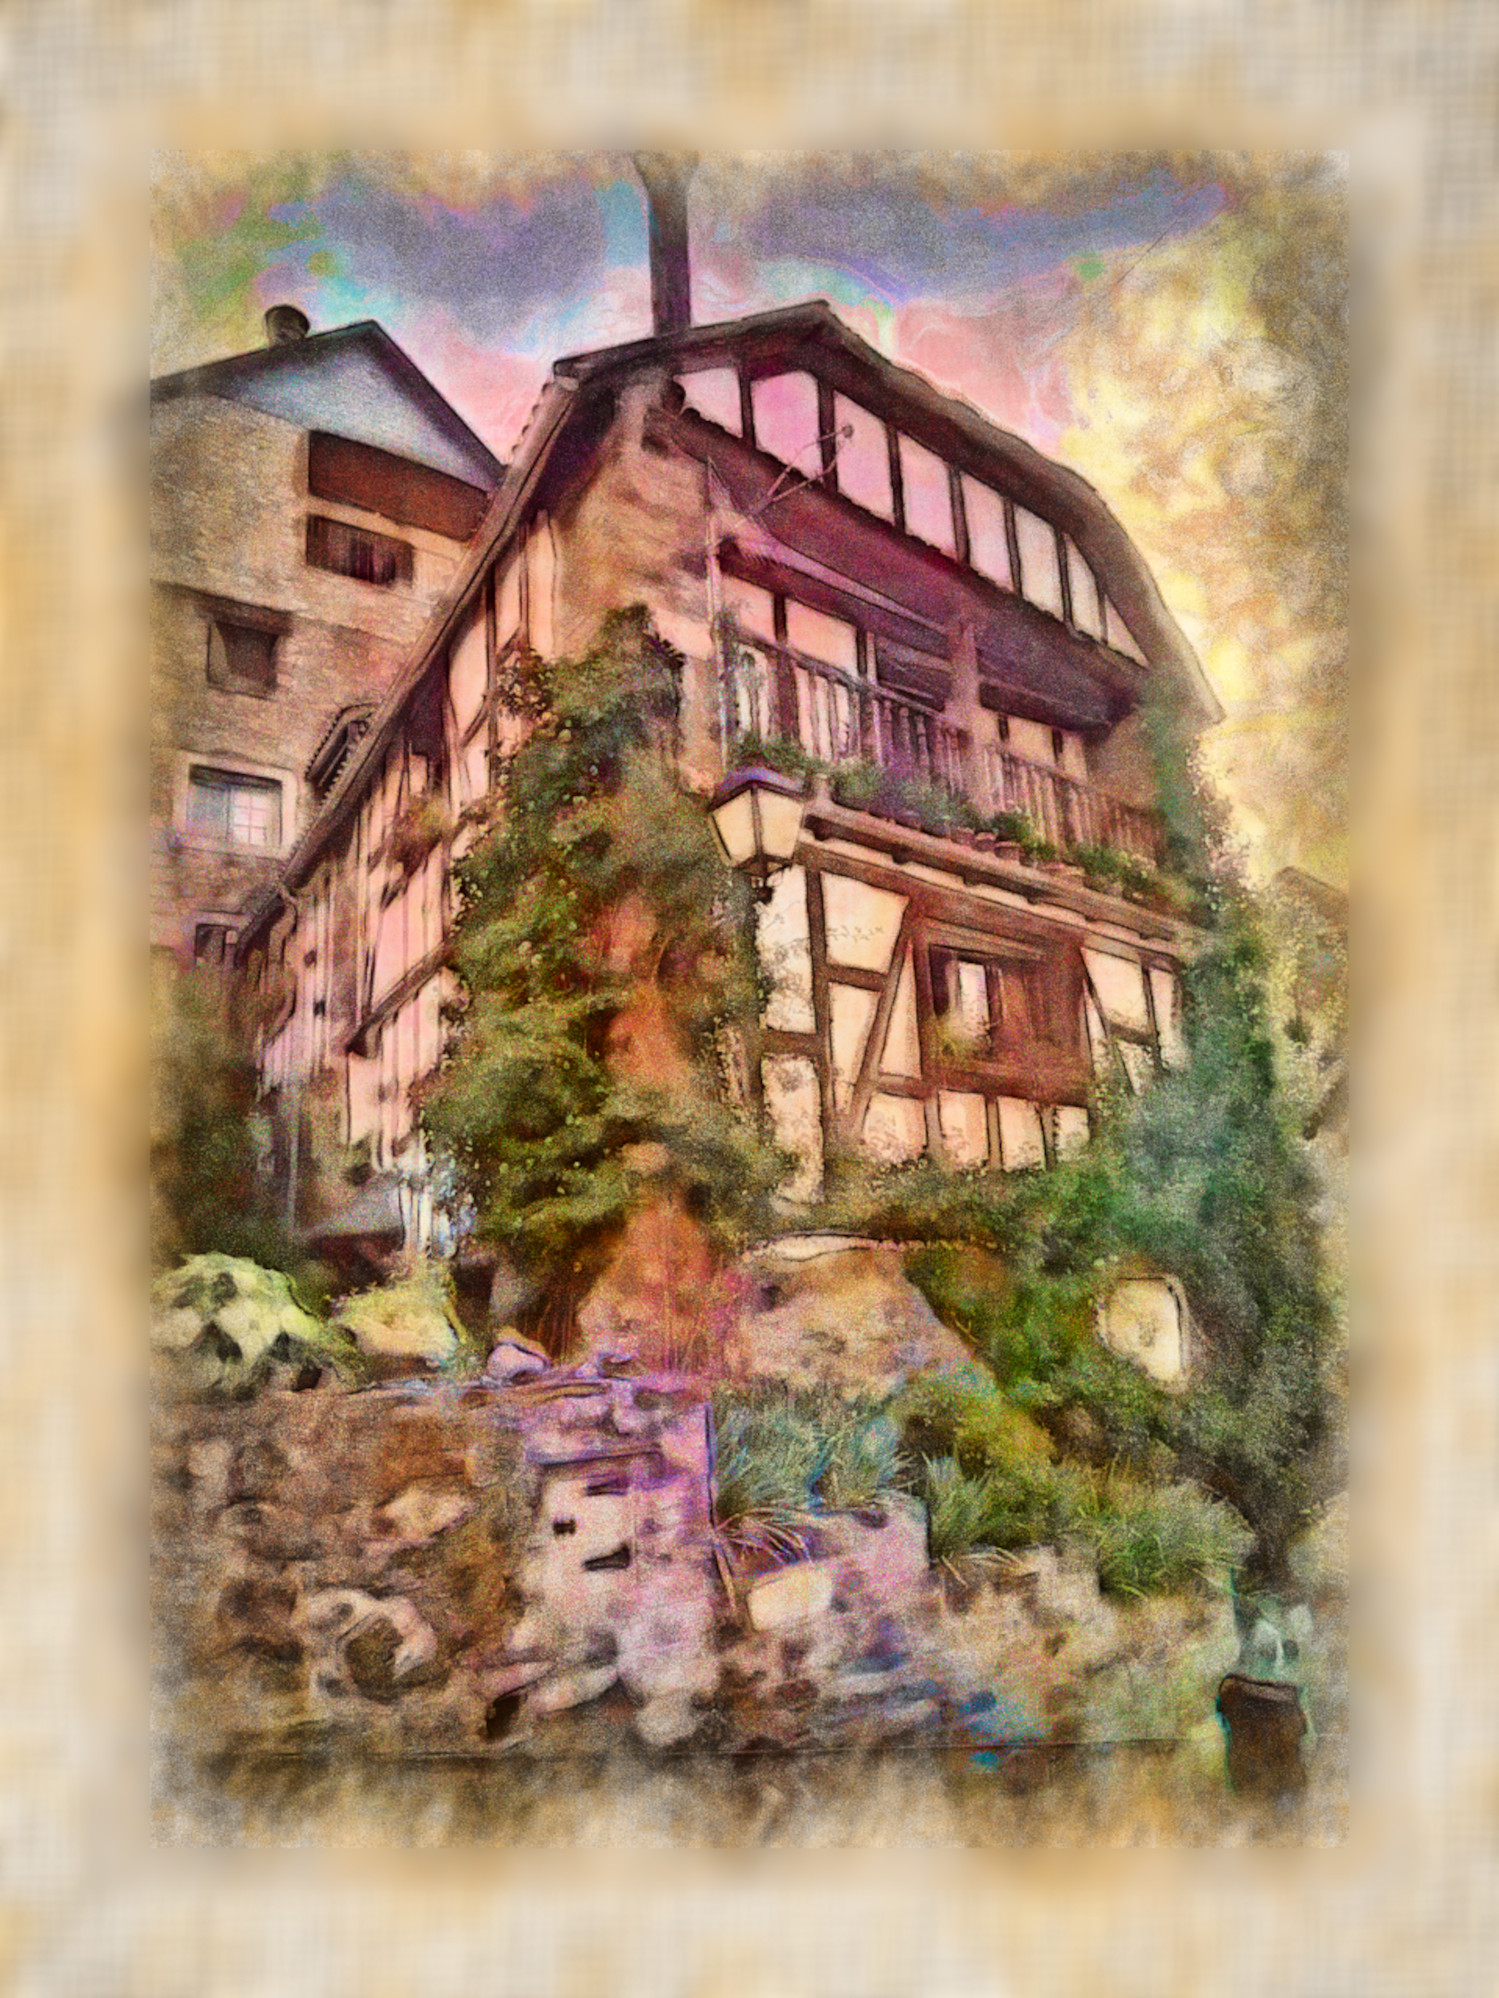 2023-09-27 15-17-28 RuralHouse_Pyrenees casa with a Watercolor Pastels Effect 2023 (5.0,75.0,32.0,True,70.0).jpg